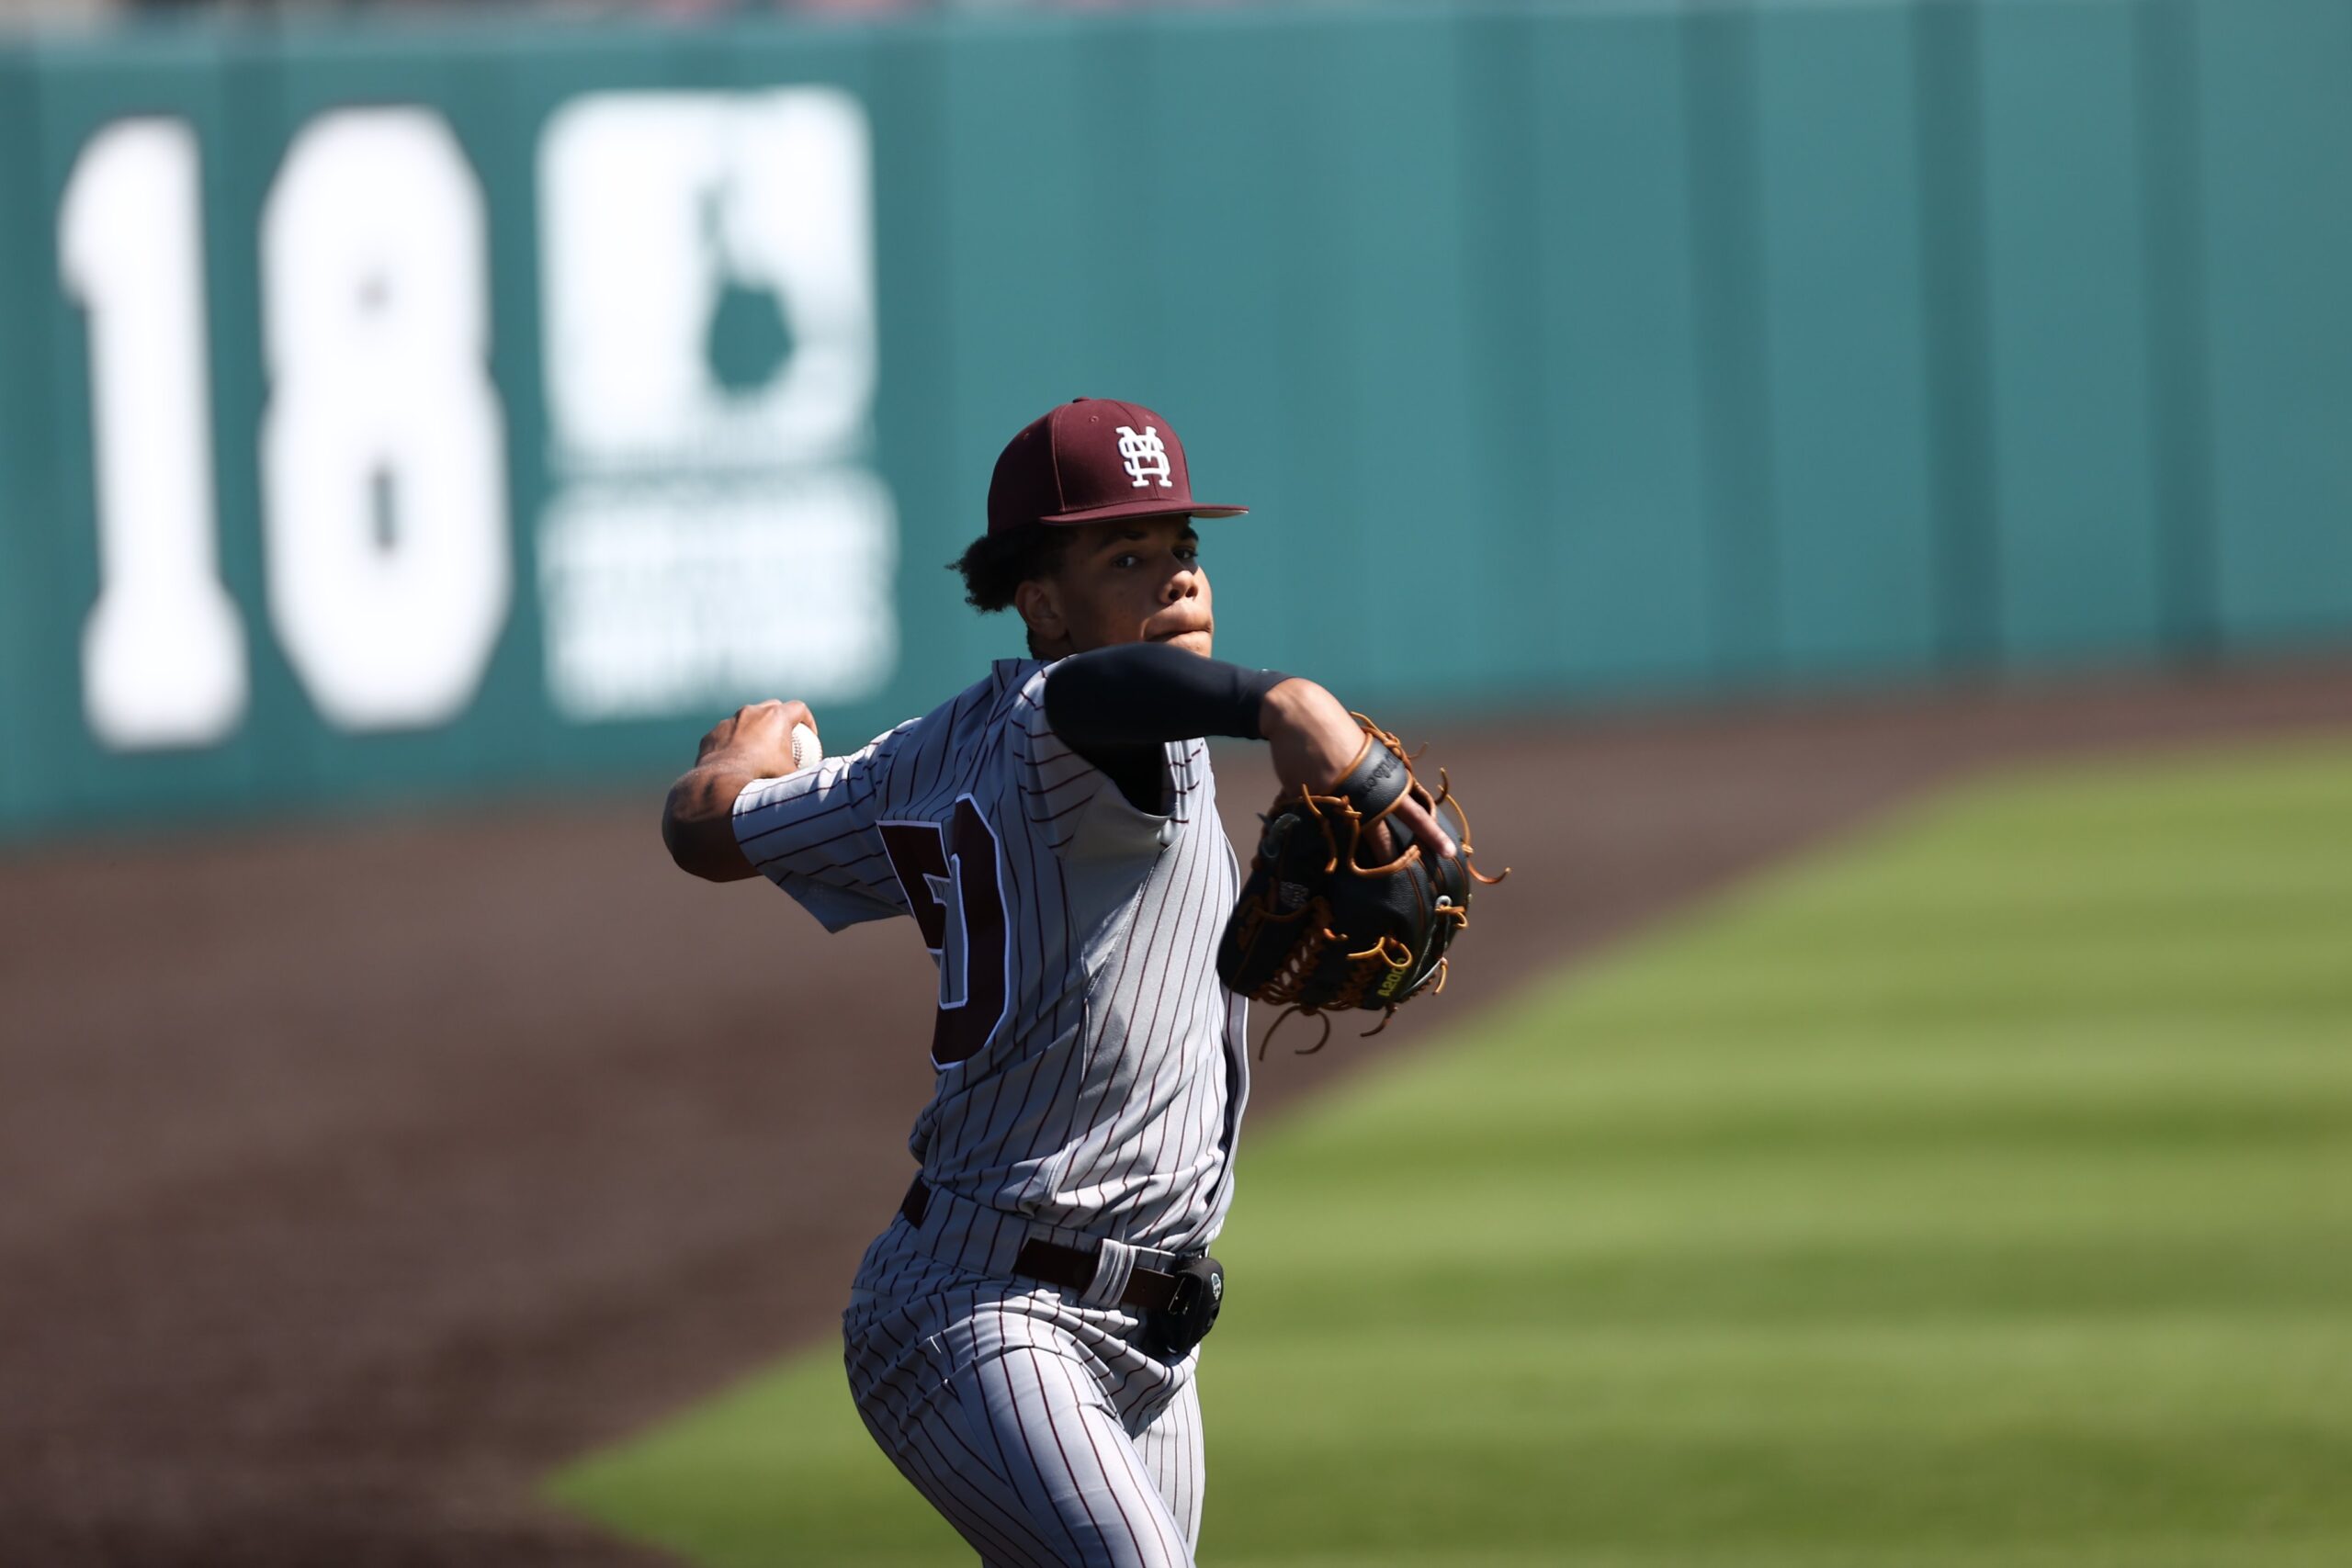 Ambidextrous freshman pitcher Jurrangelo Cijntje offers Mississippi State baseball rare chance to it up - The Dispatch